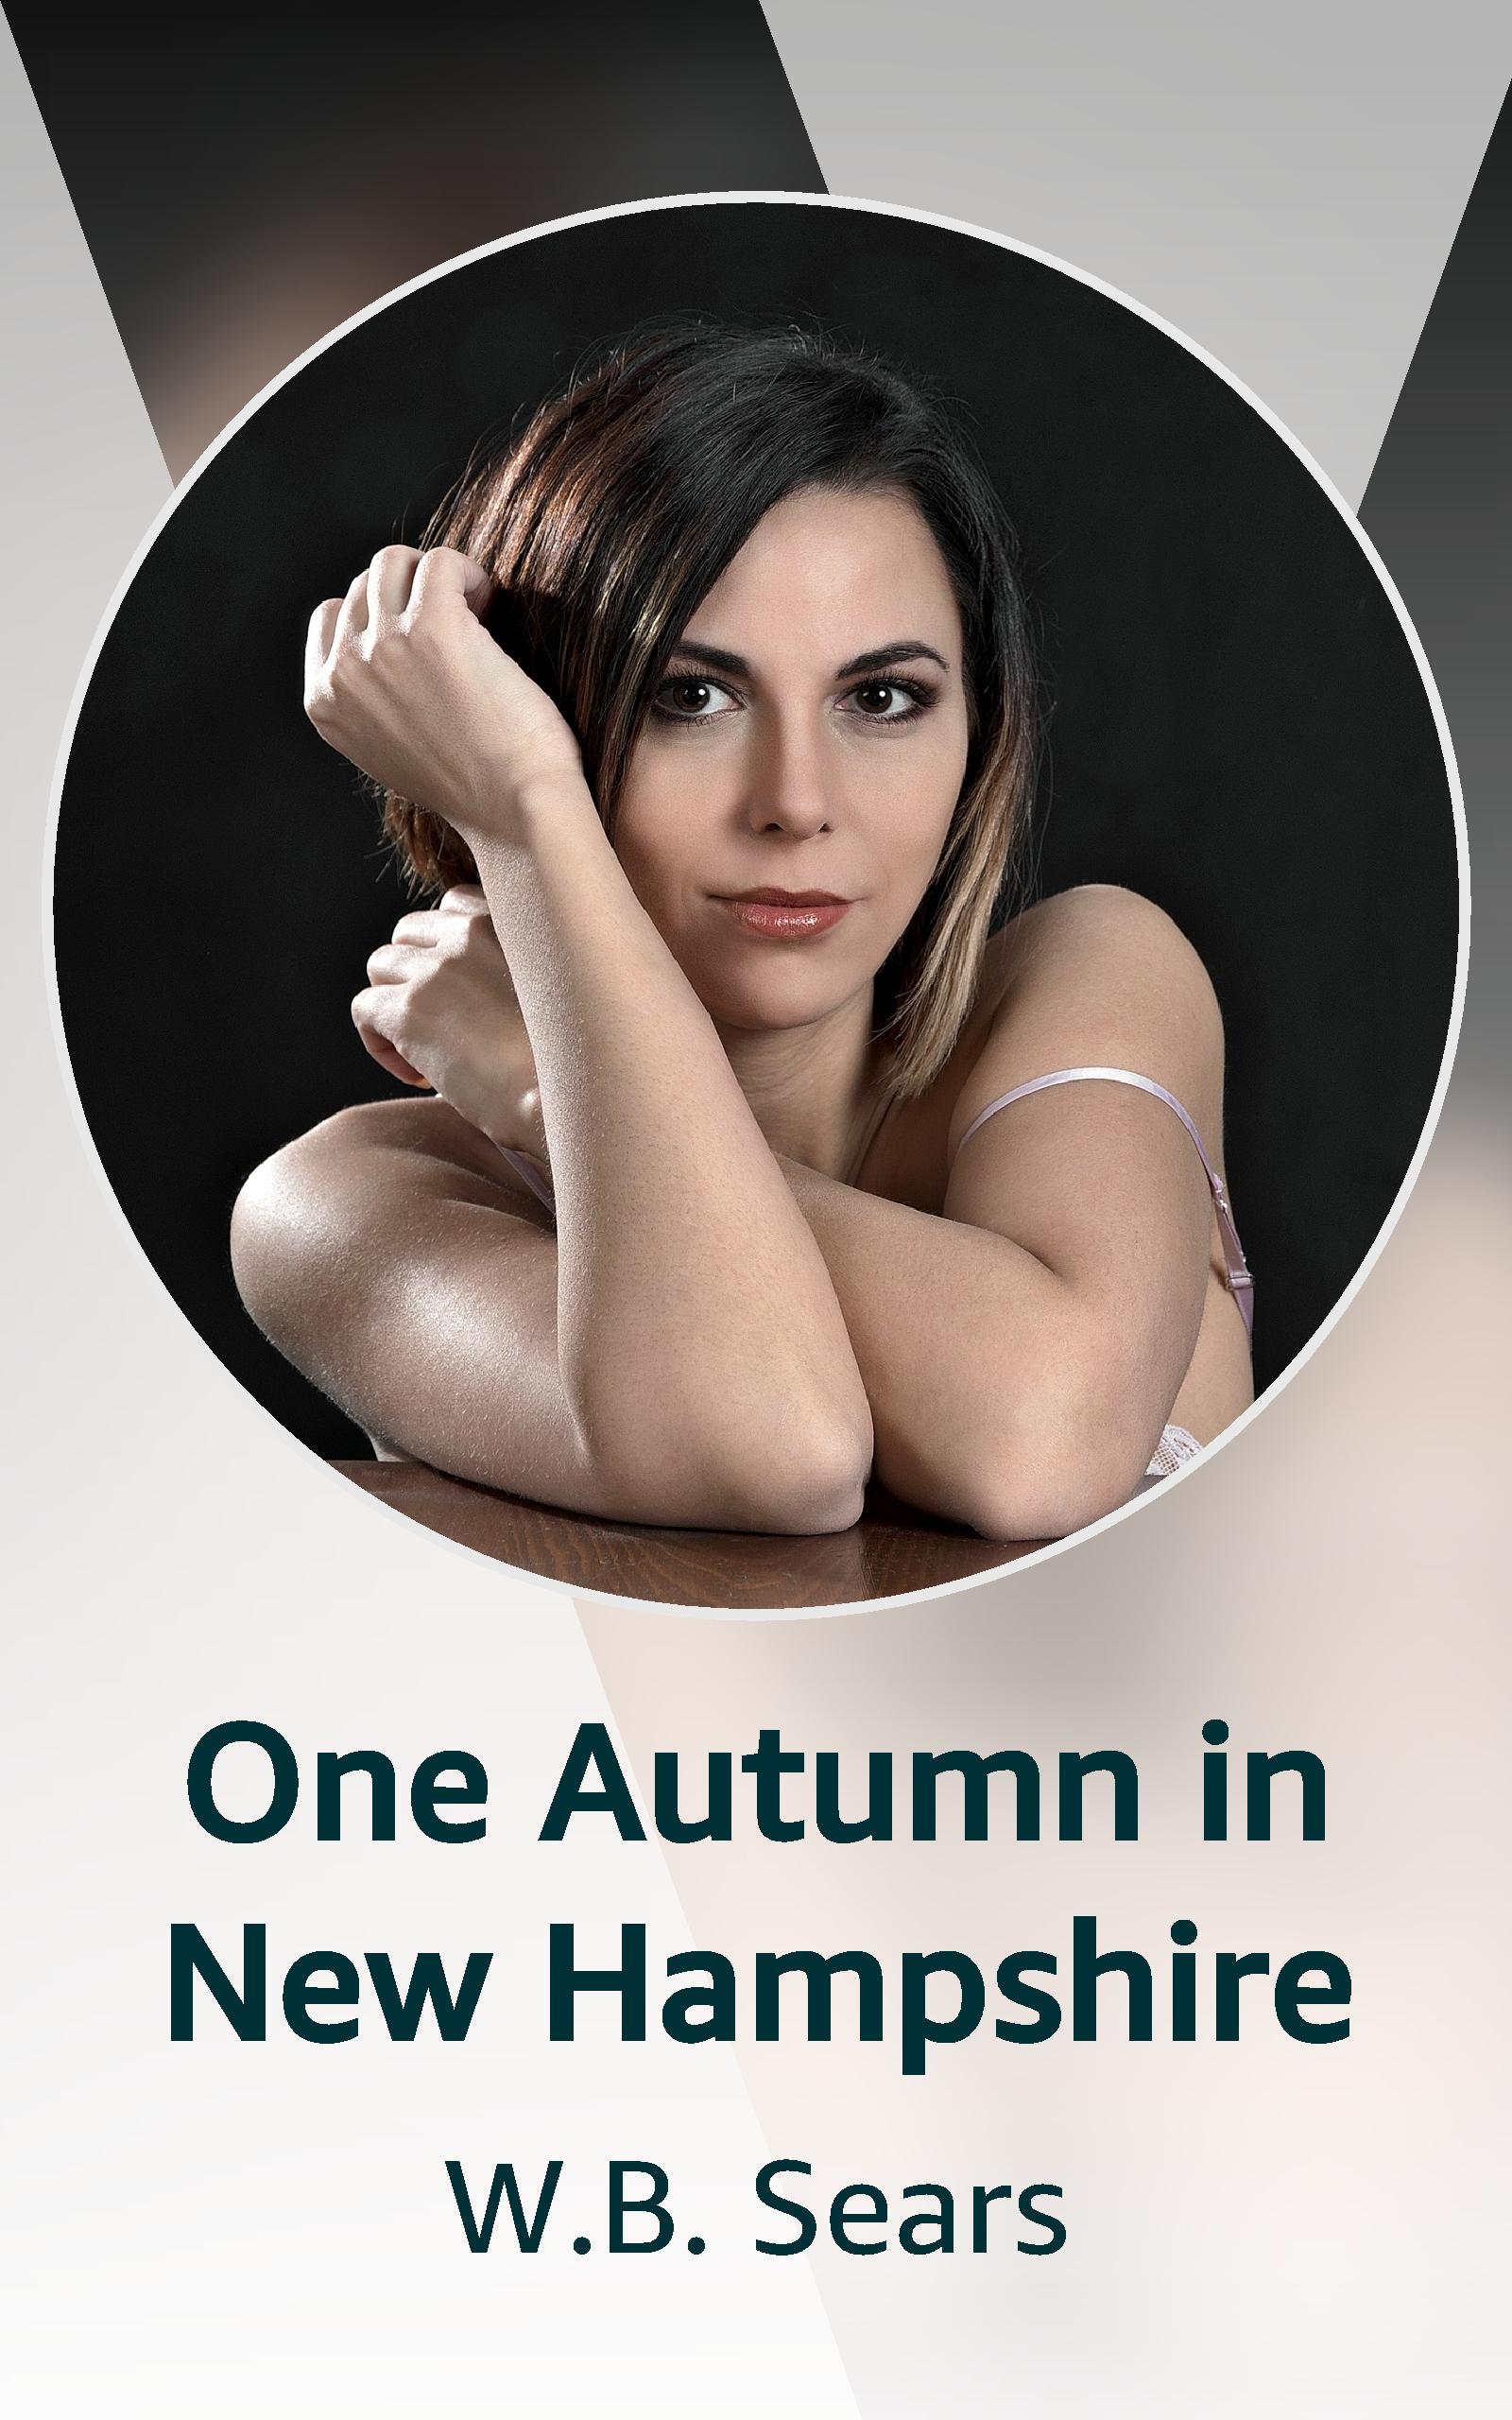 Cover Image from One Autumn in New Hampshire from Kindle Vella